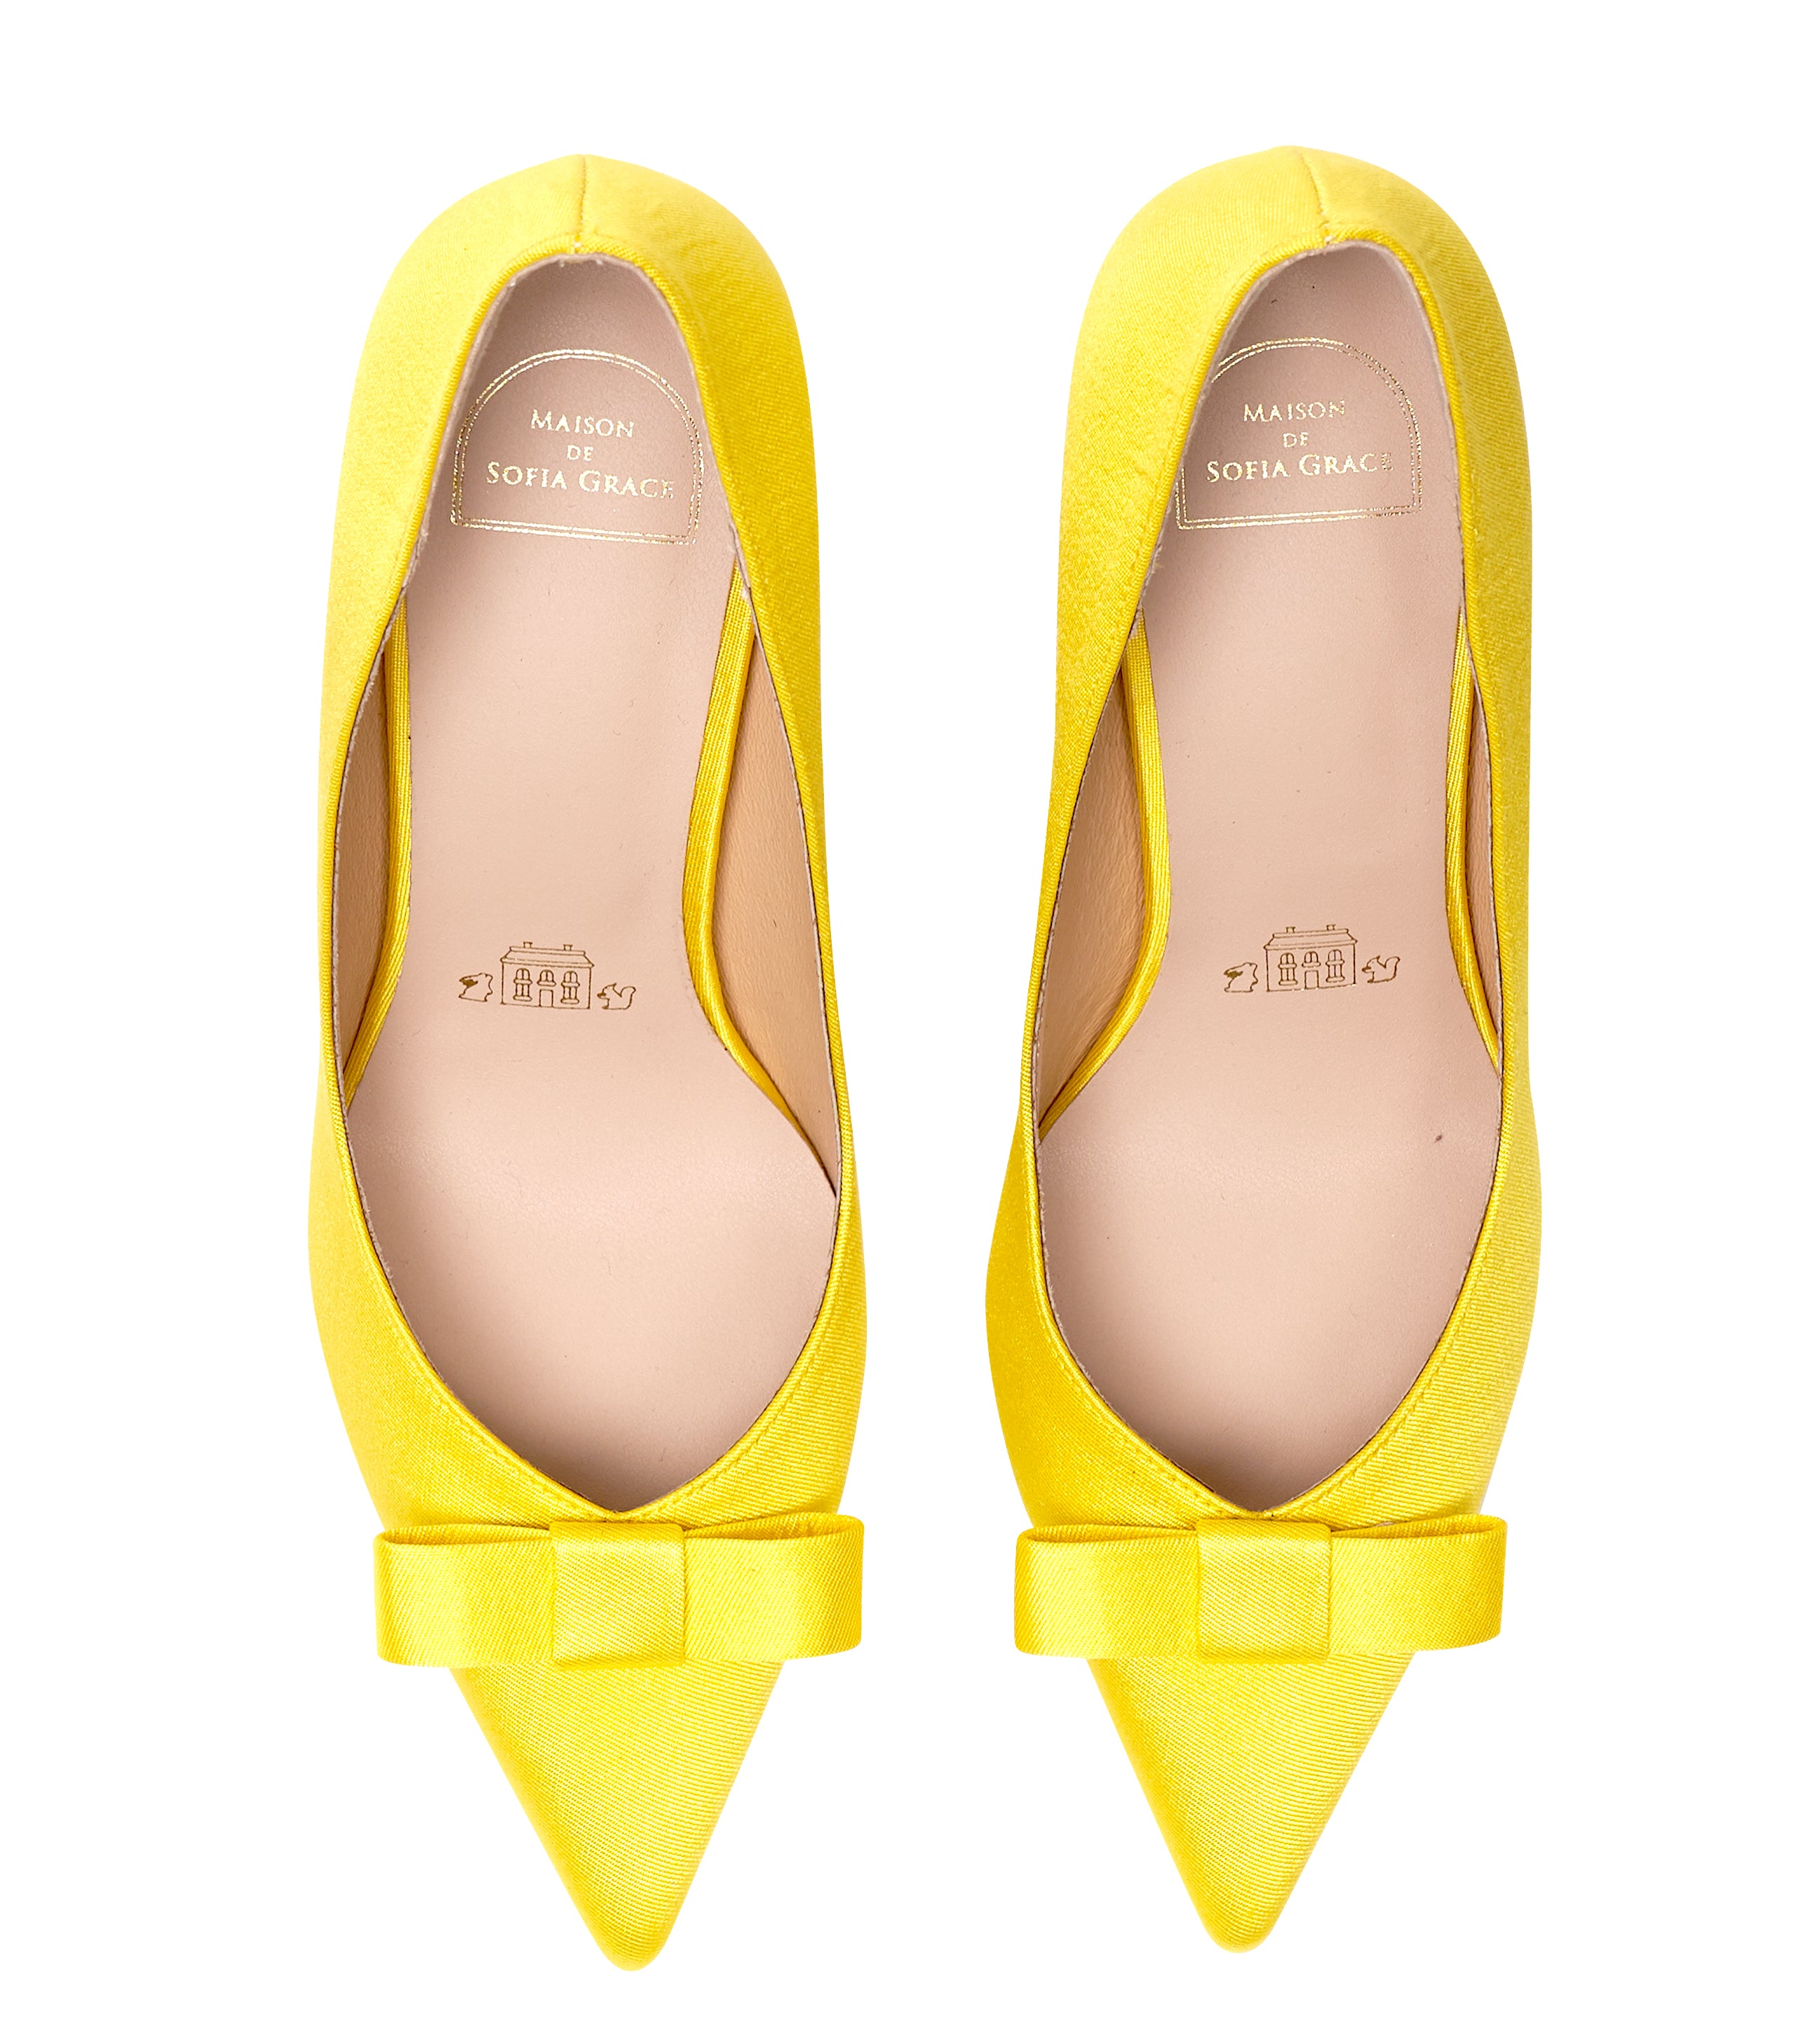 JACKIE PUMPS-YELLOW